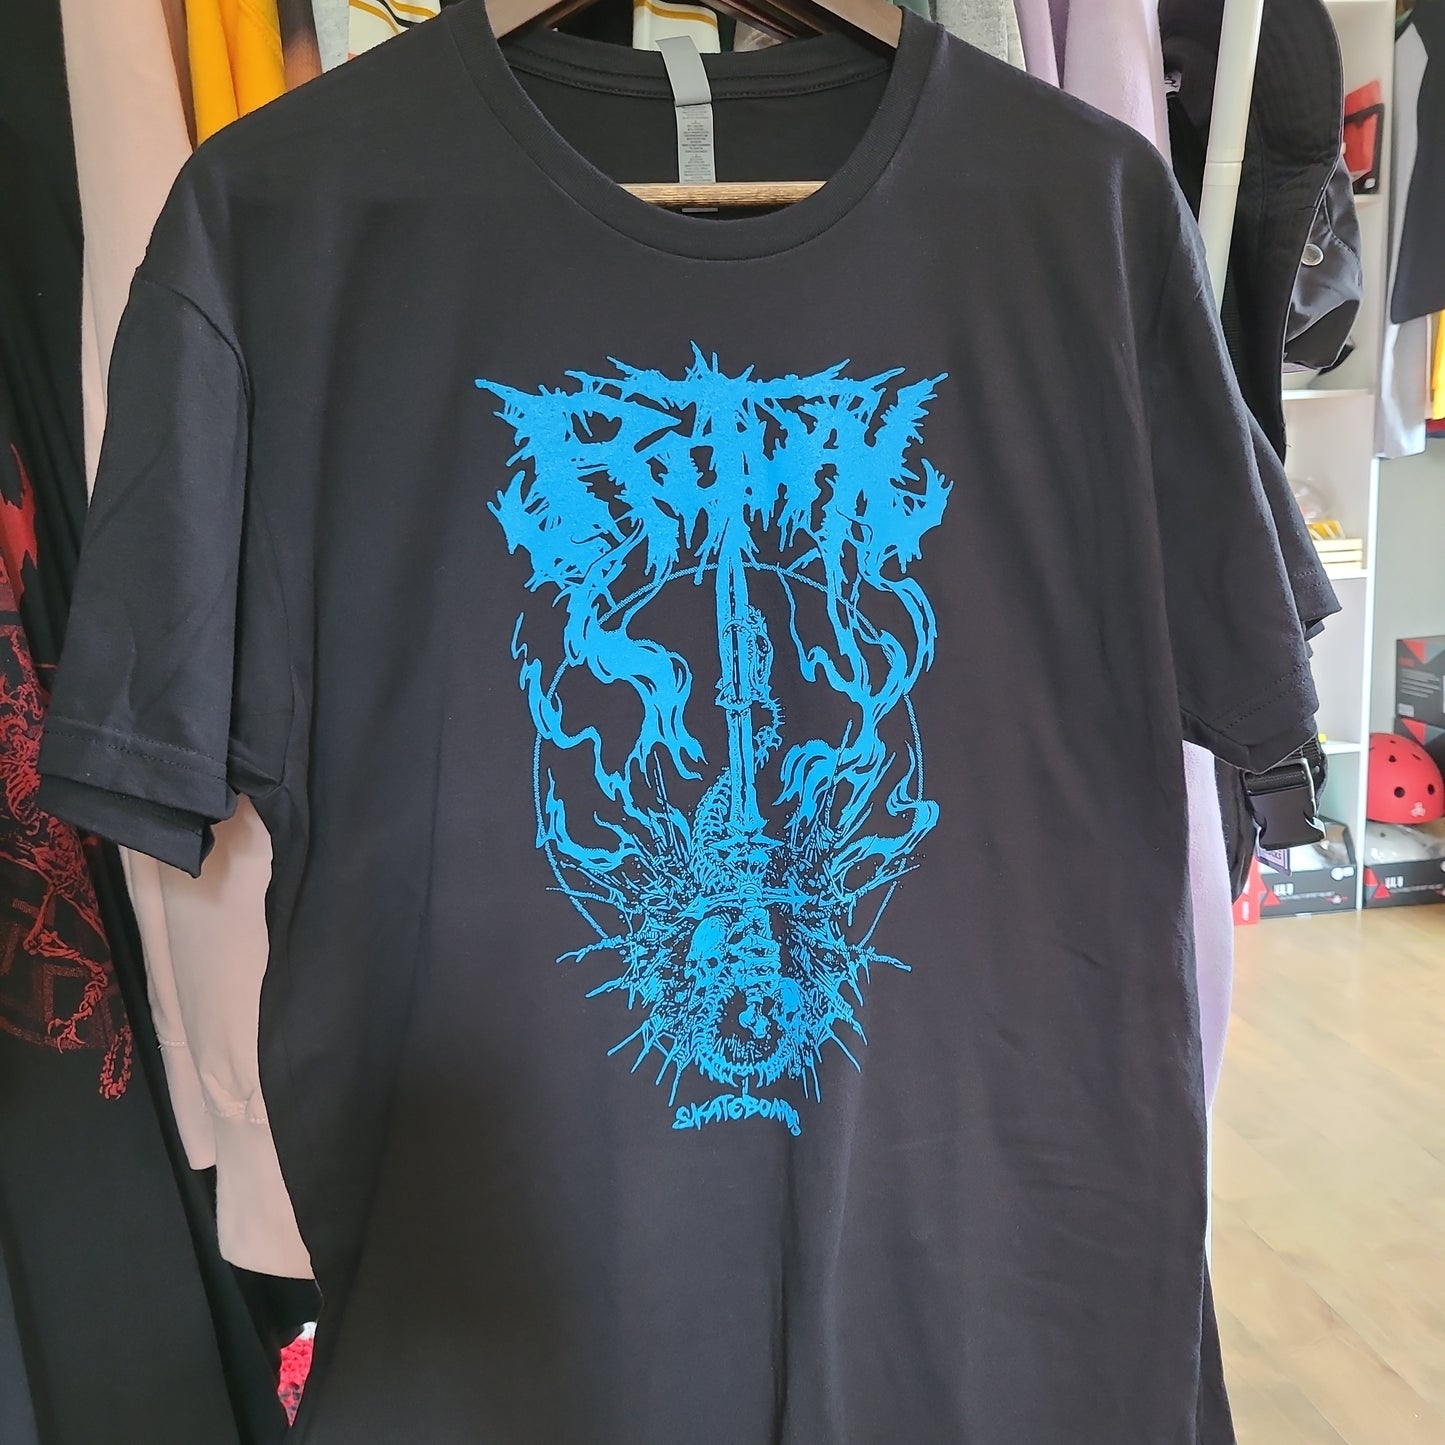 Ritual - From Ashes T-Shirt